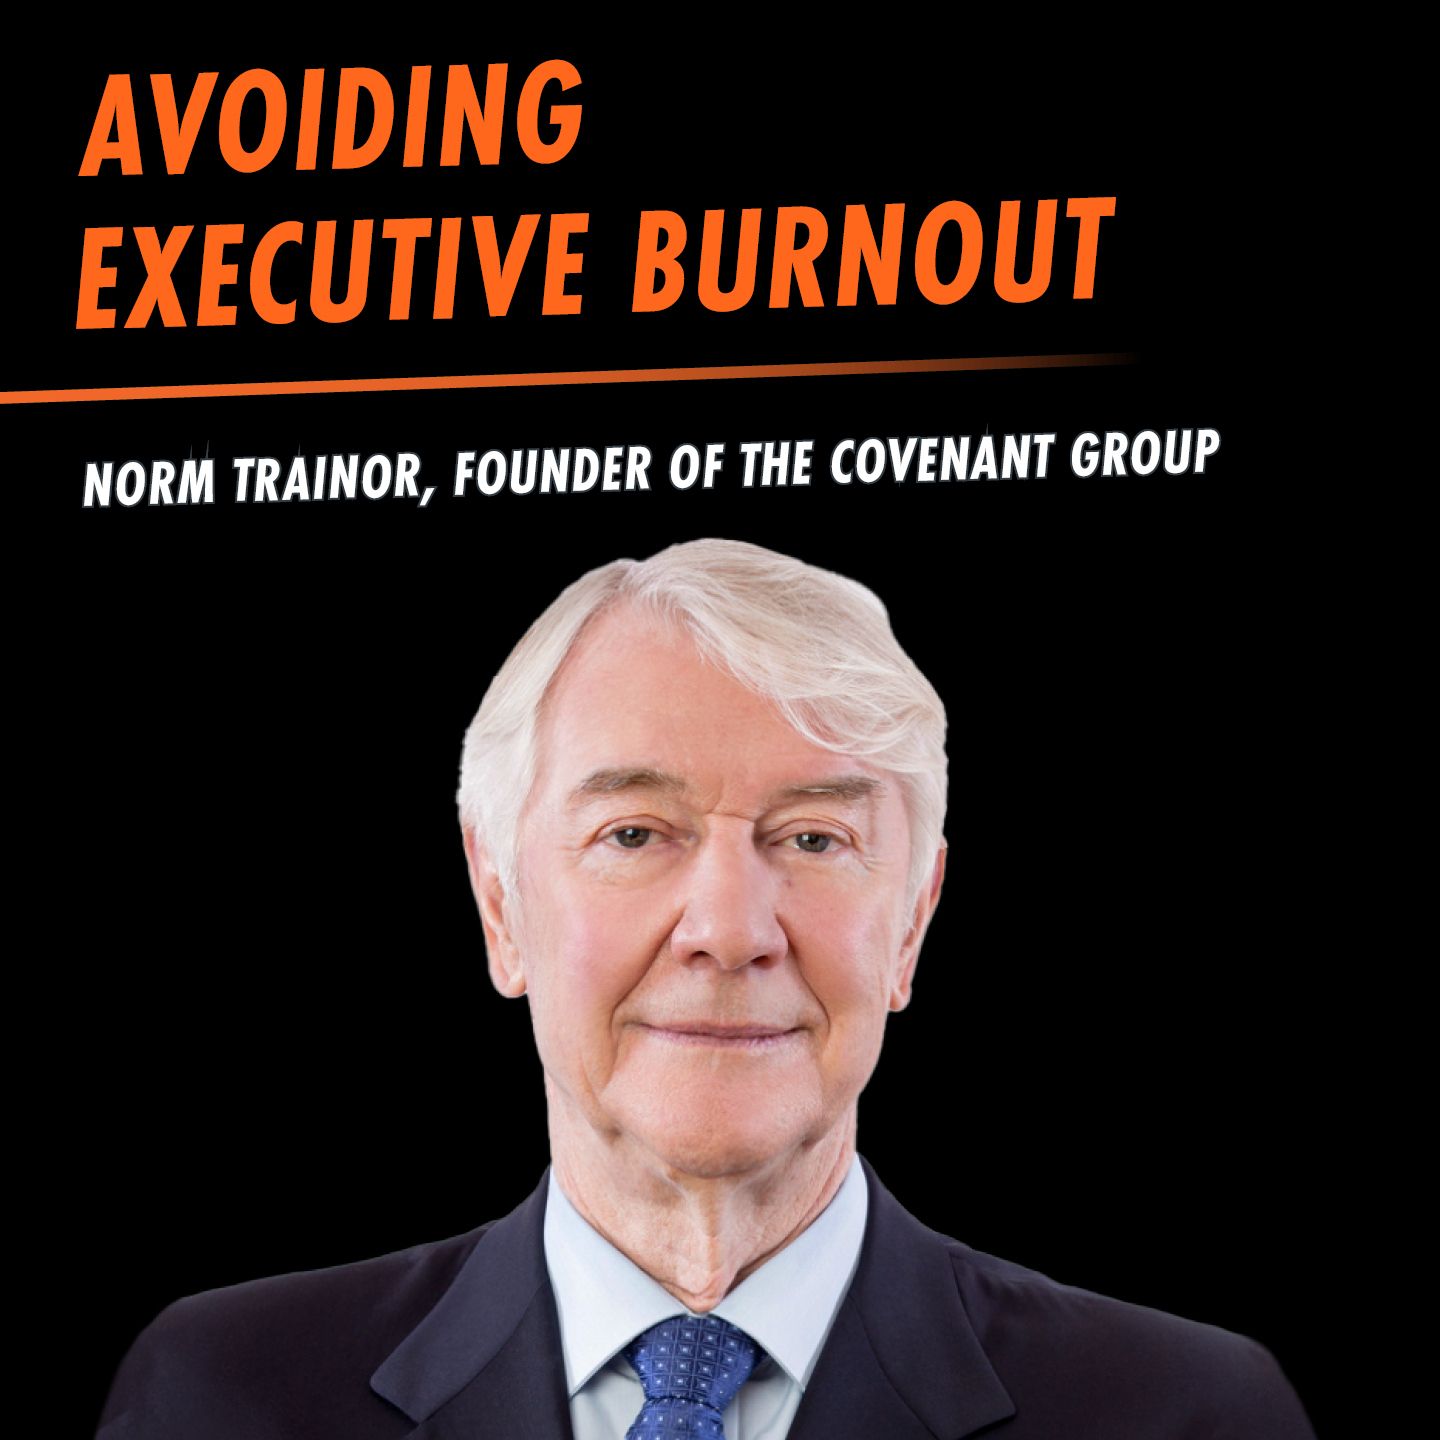 360: Avoiding Executive Burnout featuring Norm Trainor, Founder and CEO of The Covenant Group